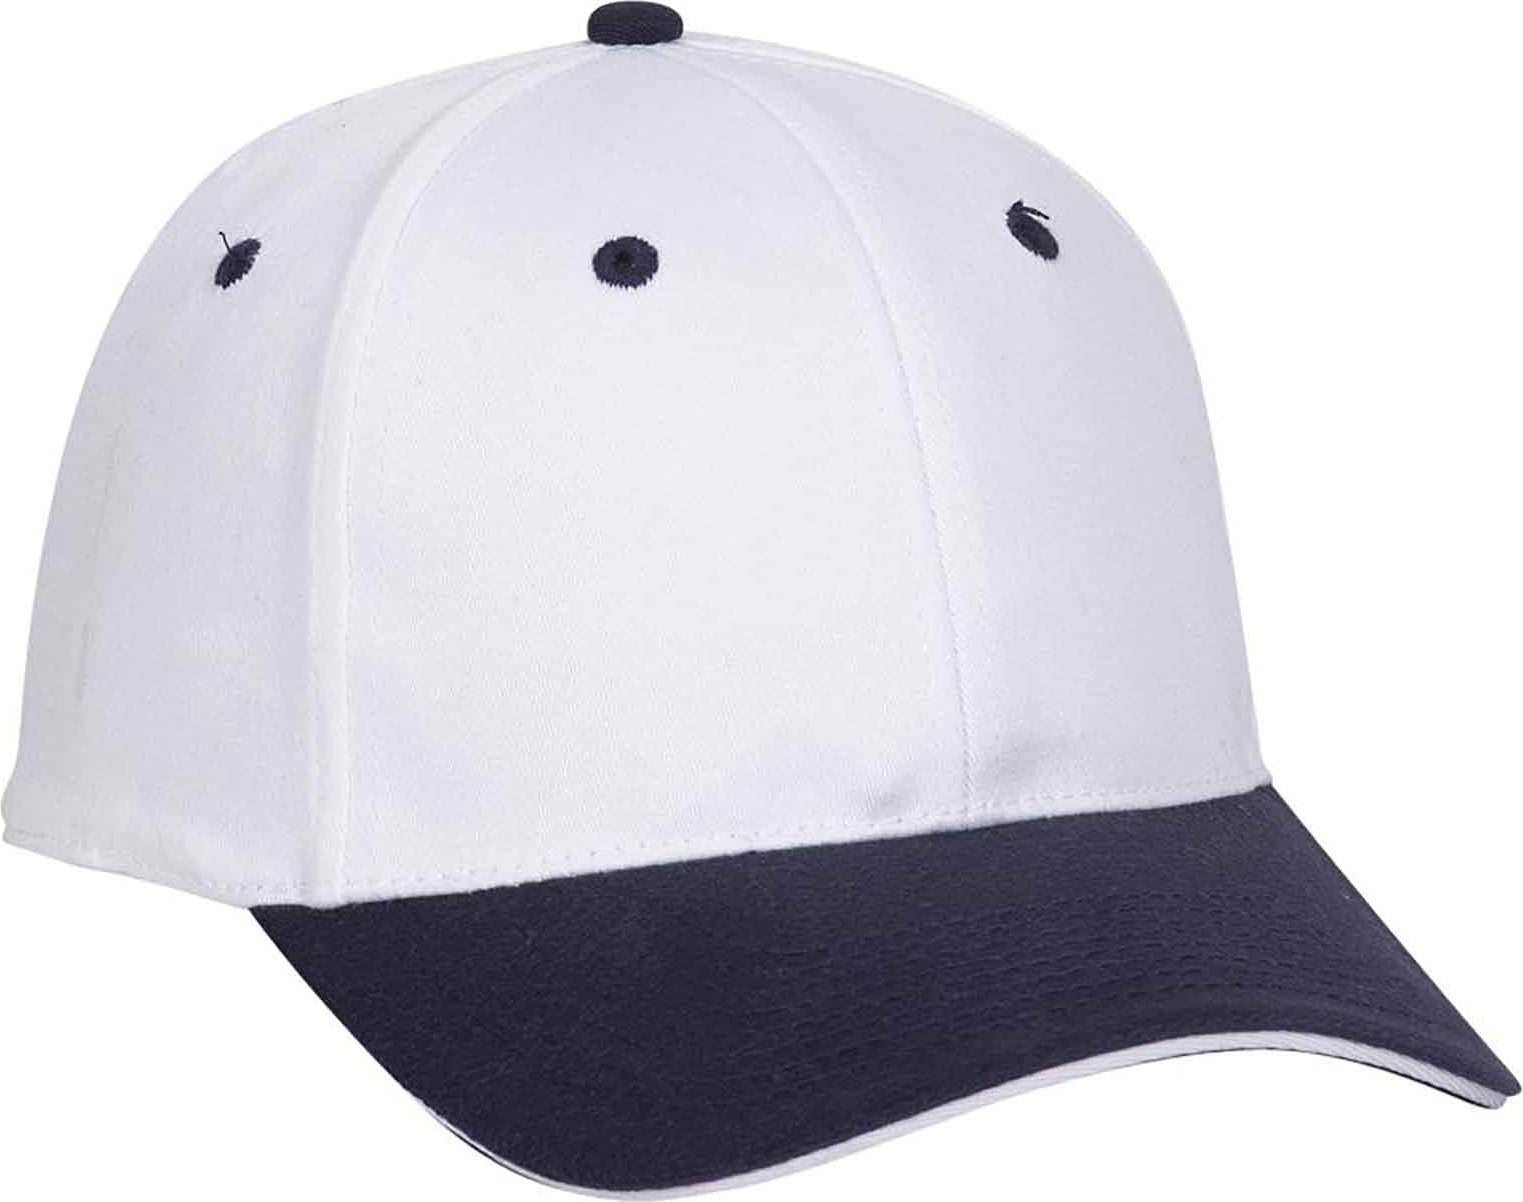 OTTO 12-267 Stretchable Deluxe Brushed Cotton Twill Sandwich Visor Low Profile Pro Style Cap S/M - Navy White White - HIT a Double - 1